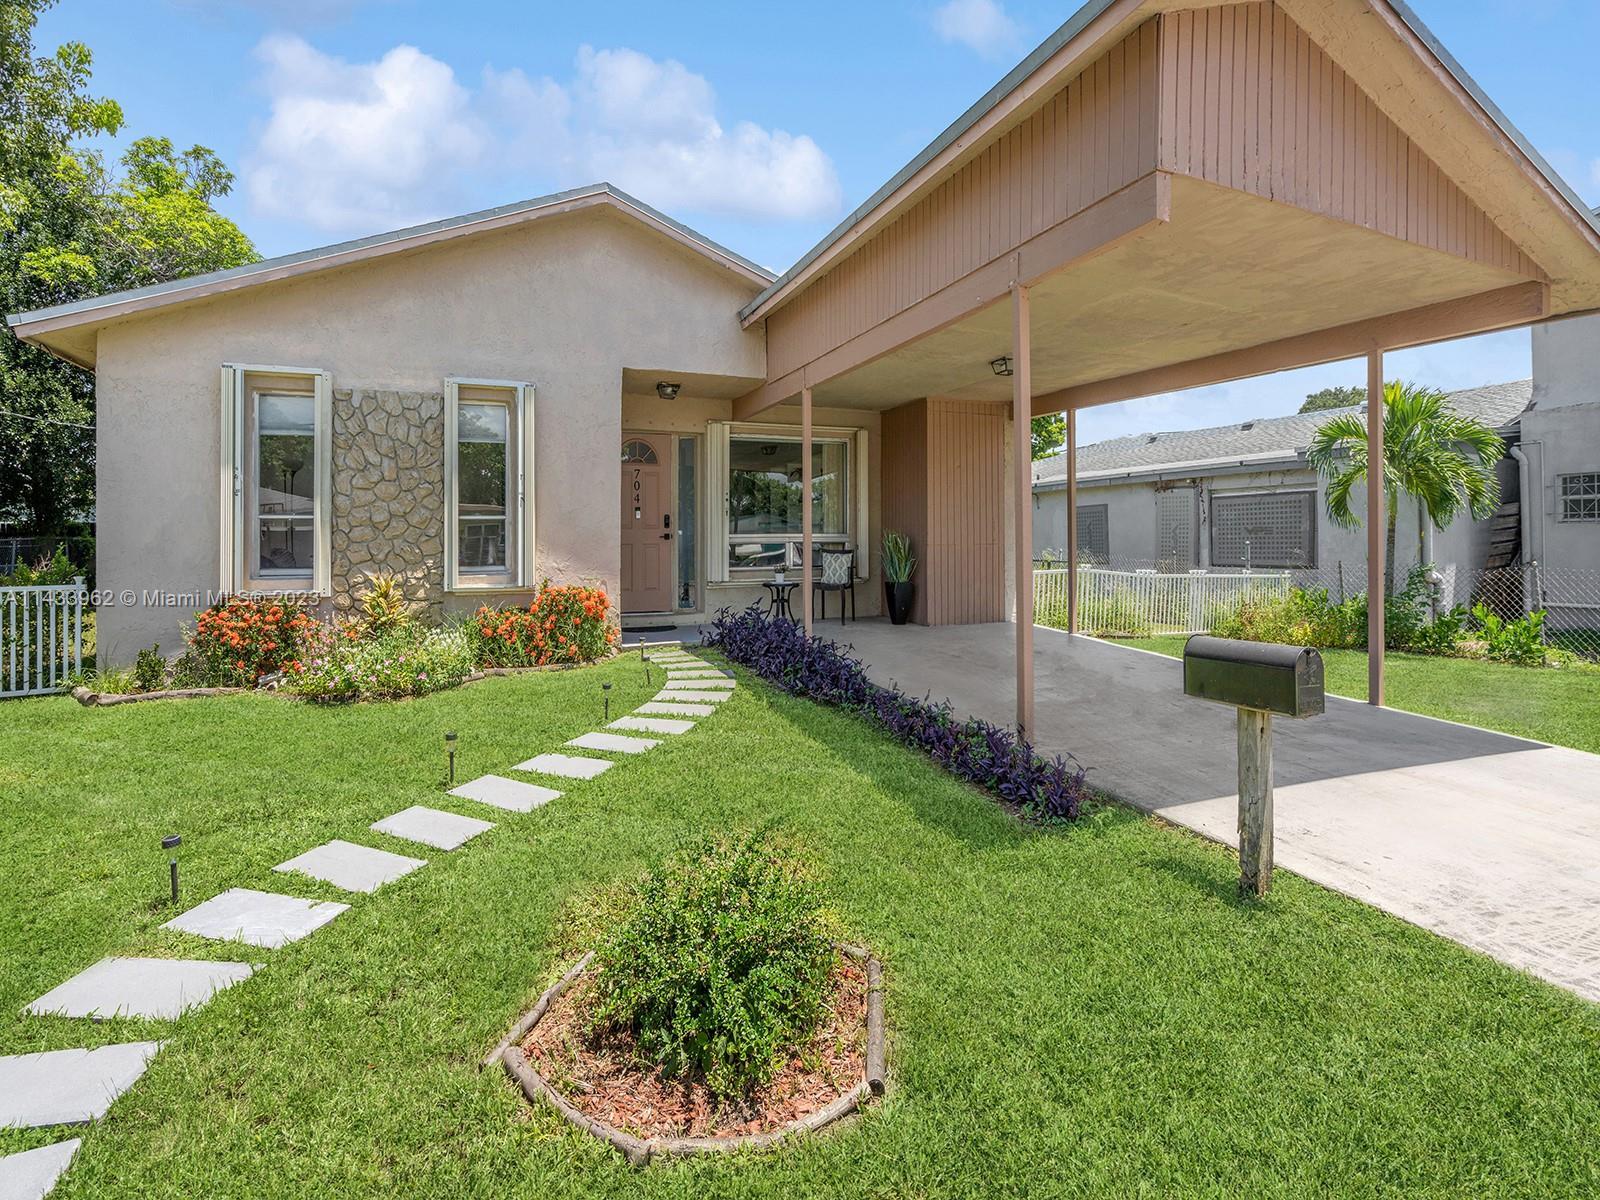 Experience this stunning home nestled in the bourgeoning Downtown Pompano. Smart floor plan designed